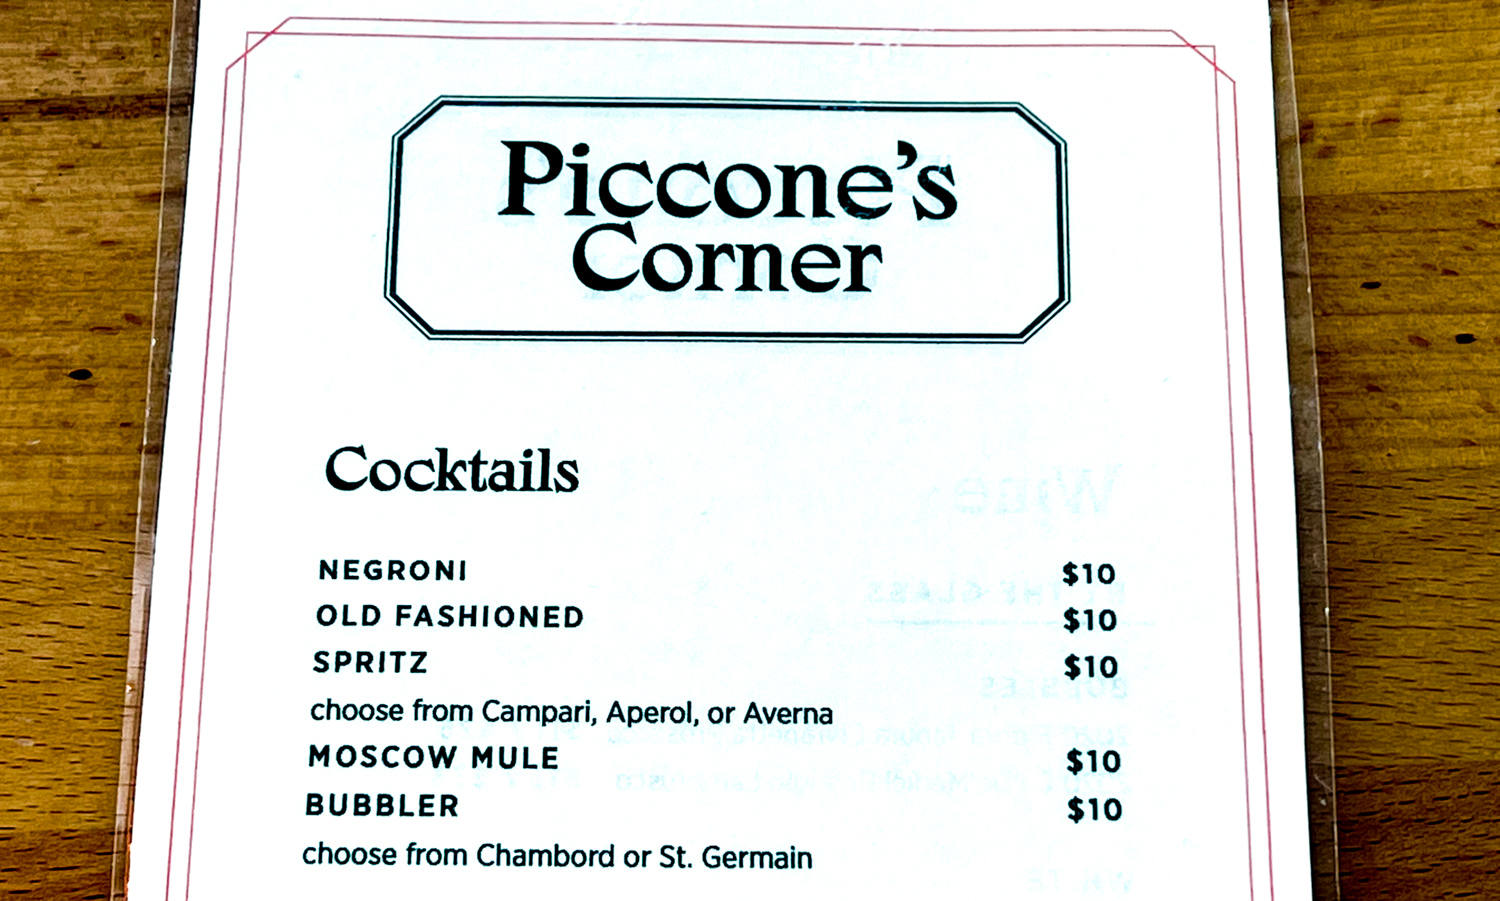 A Magnificent Meal at Piccone’s Corner Portland, Oregon Photos by Steven Shomler Culinary Treasure Network 